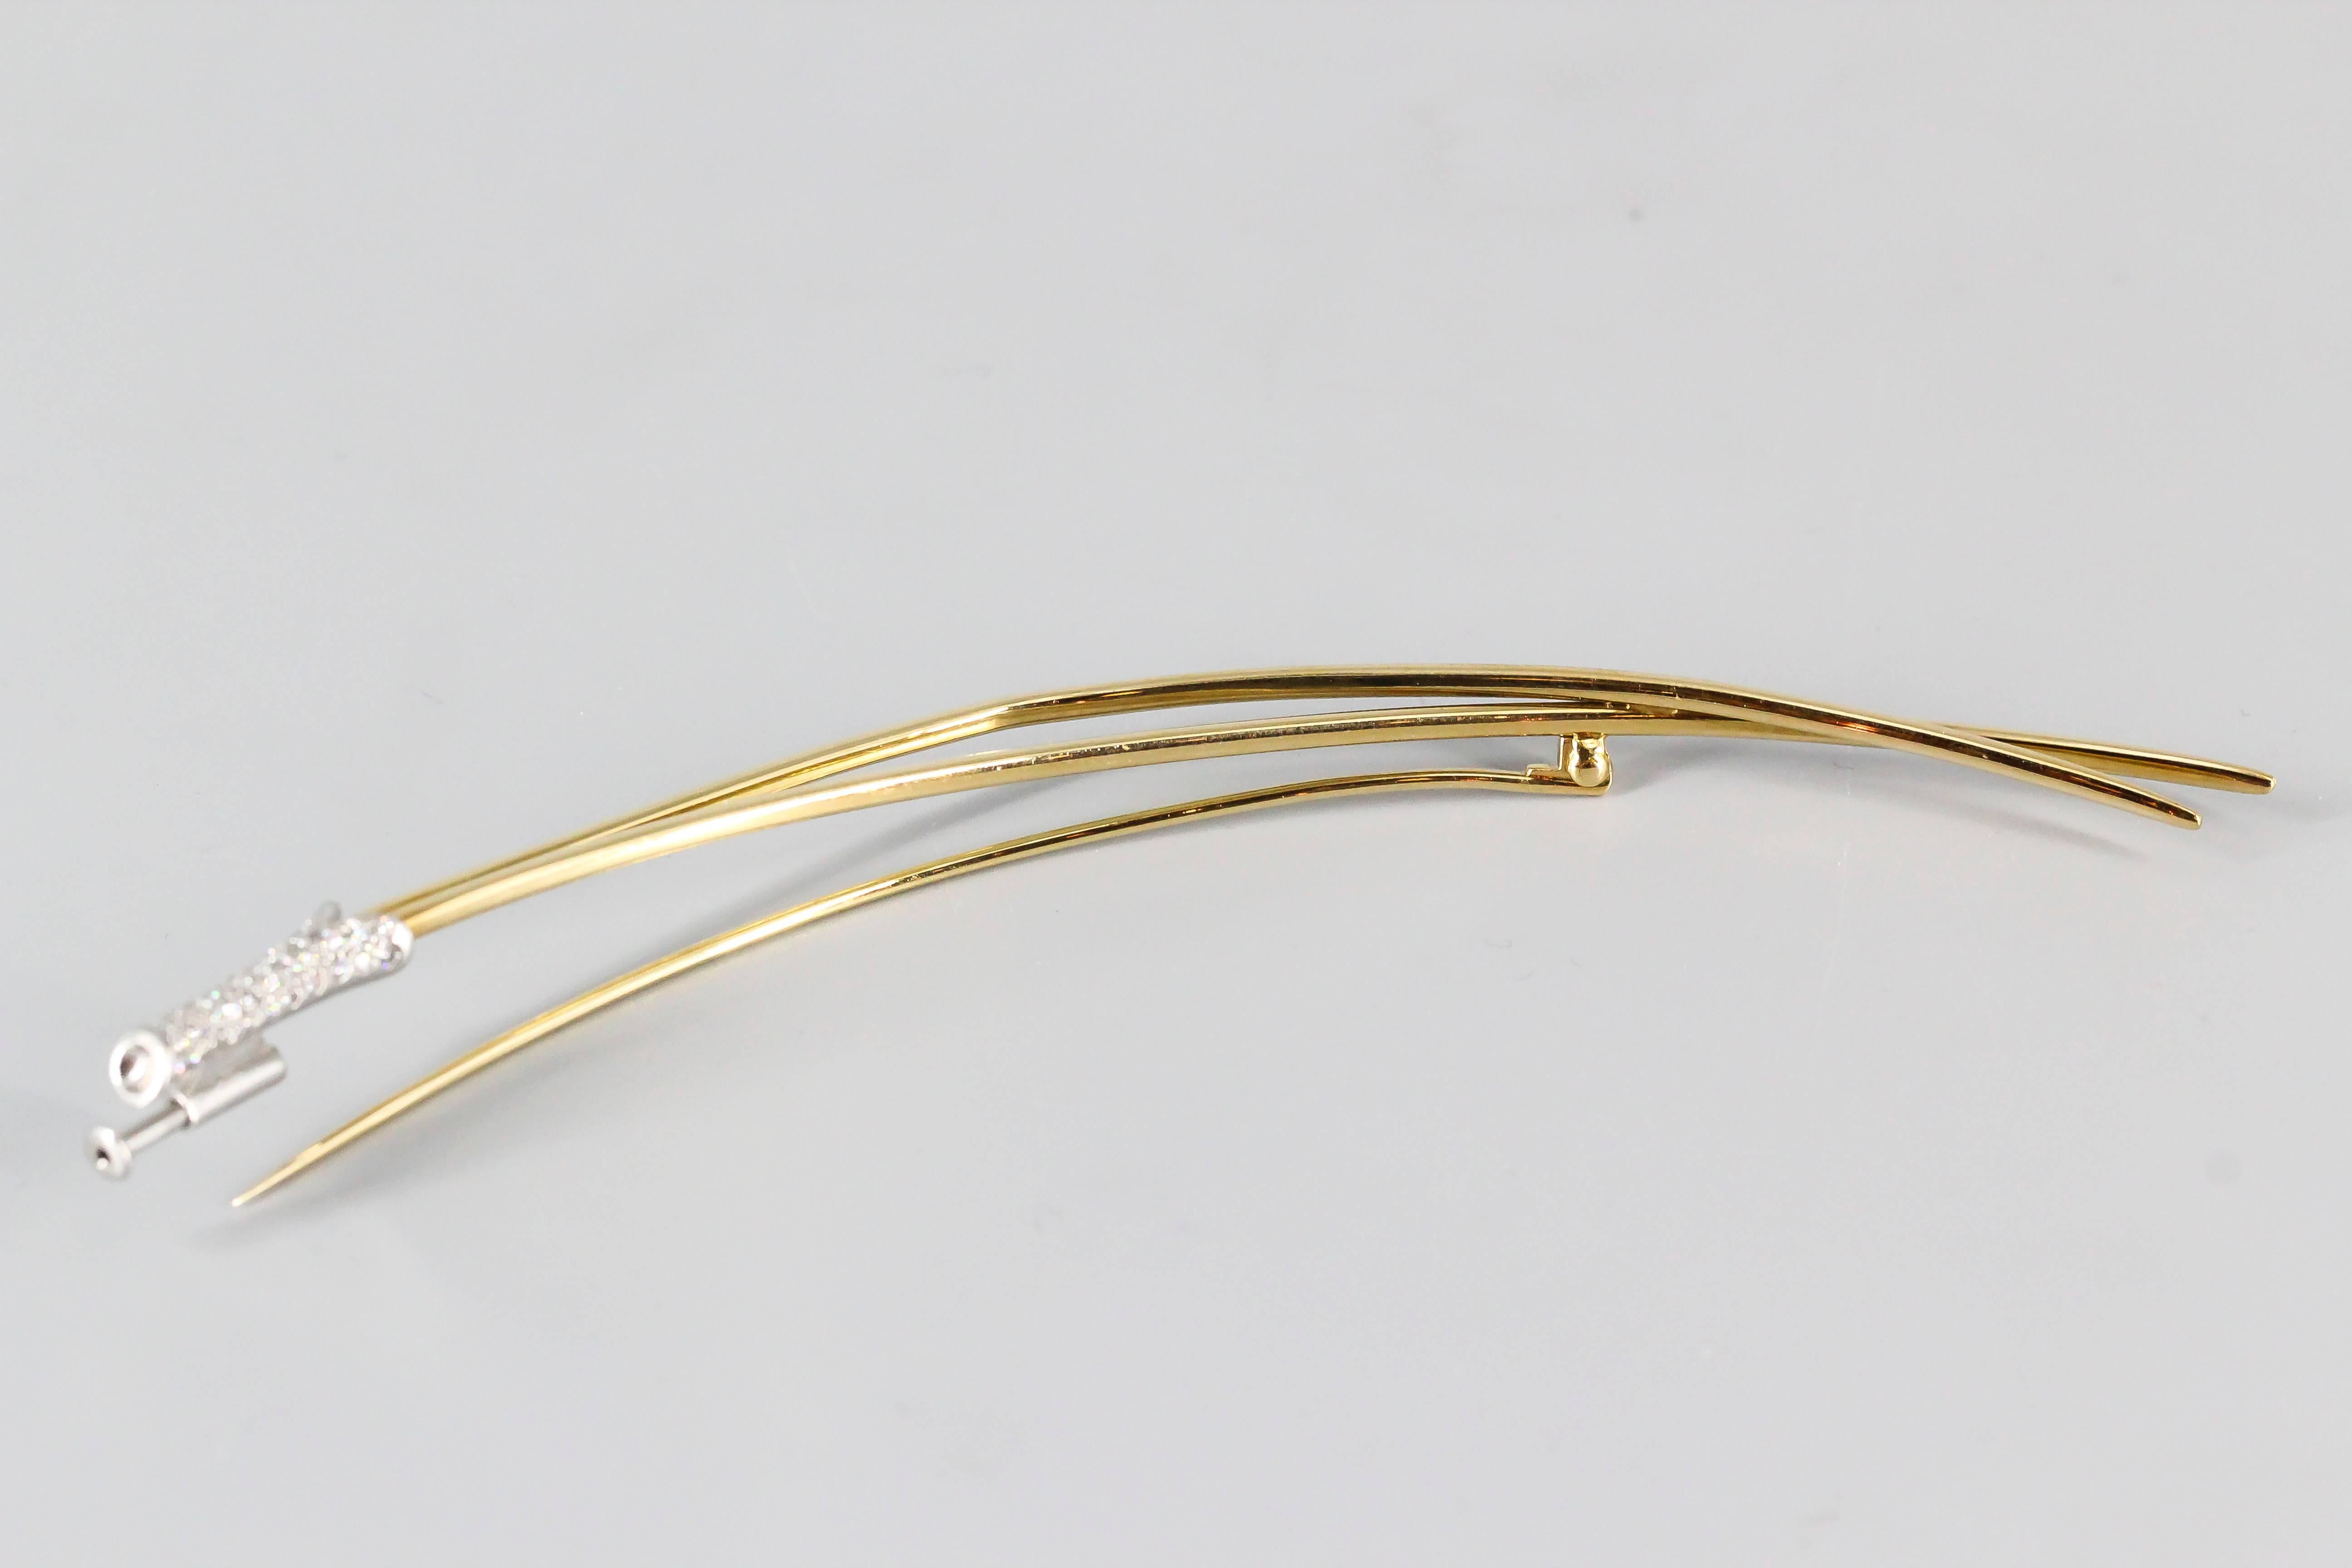 Very rare and interesting diamond, platinum and 18K yellow gold brooch by Tiffany & Co. Elsa Peretti. It resembles blades of grass, with high grade round brilliant cut diamonds on the base of one of them, approx. .5-1.0 carats. Superb workmanship